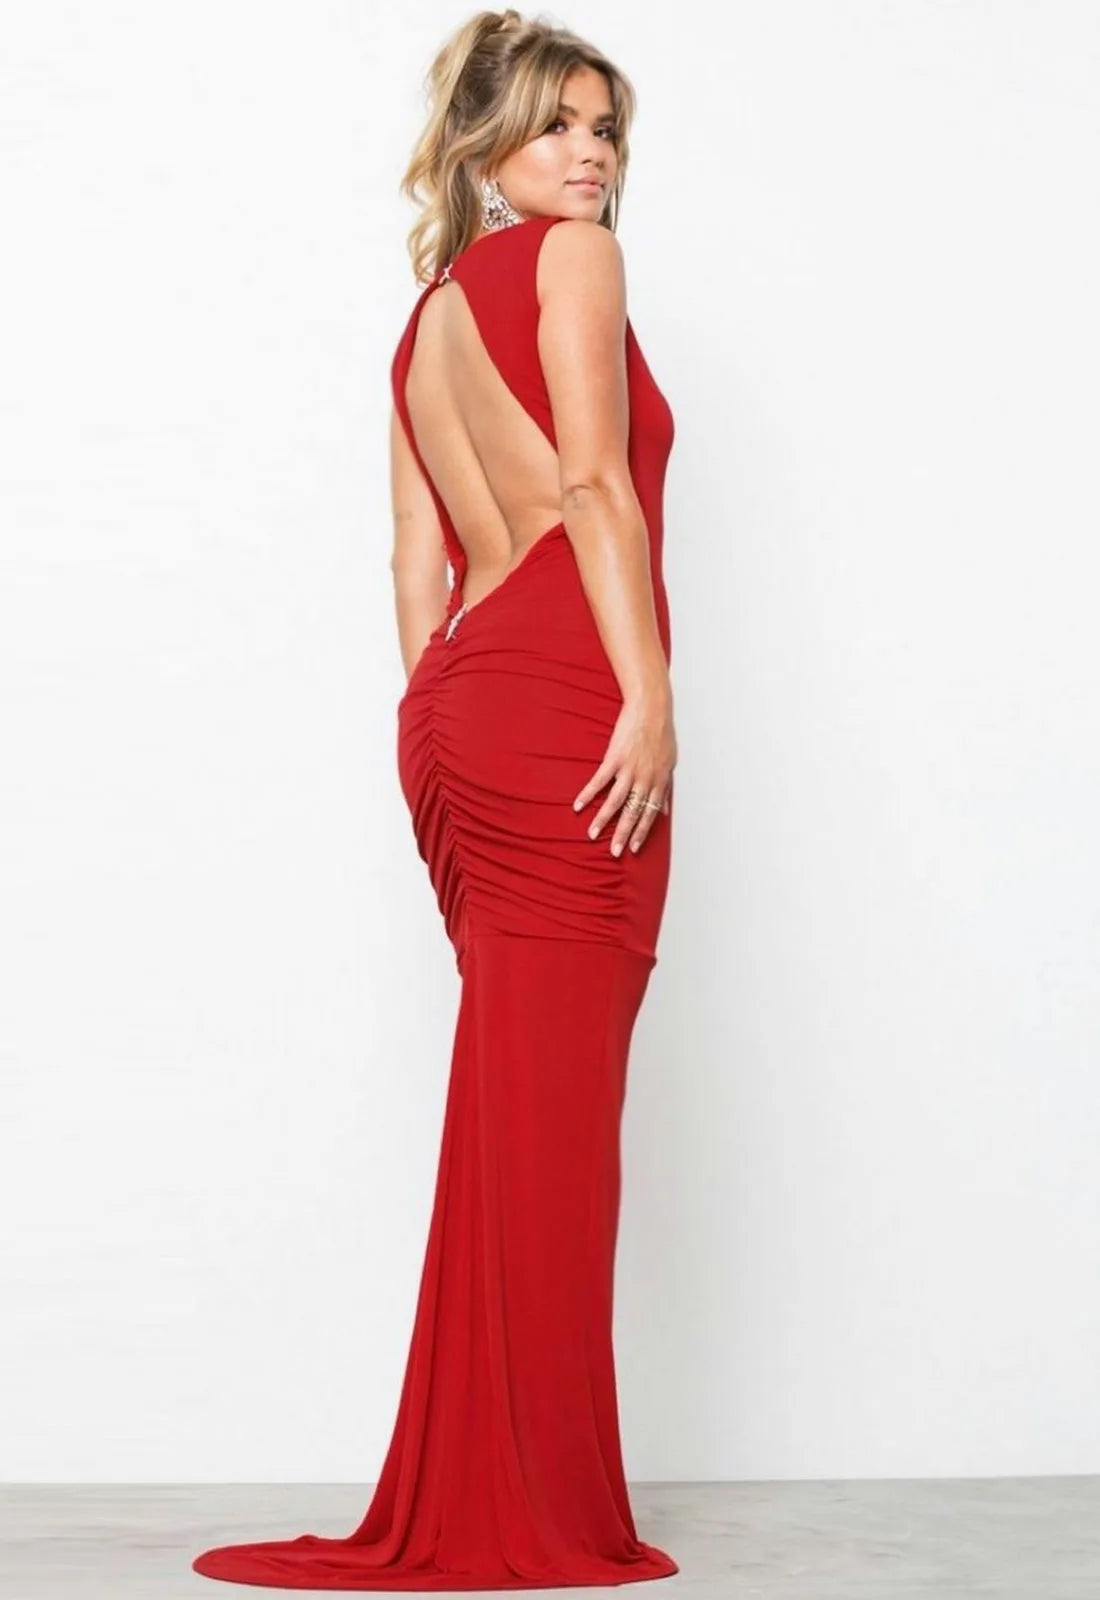 Honor Gold Bella Sleeveless Maxi Dress in Red-75096